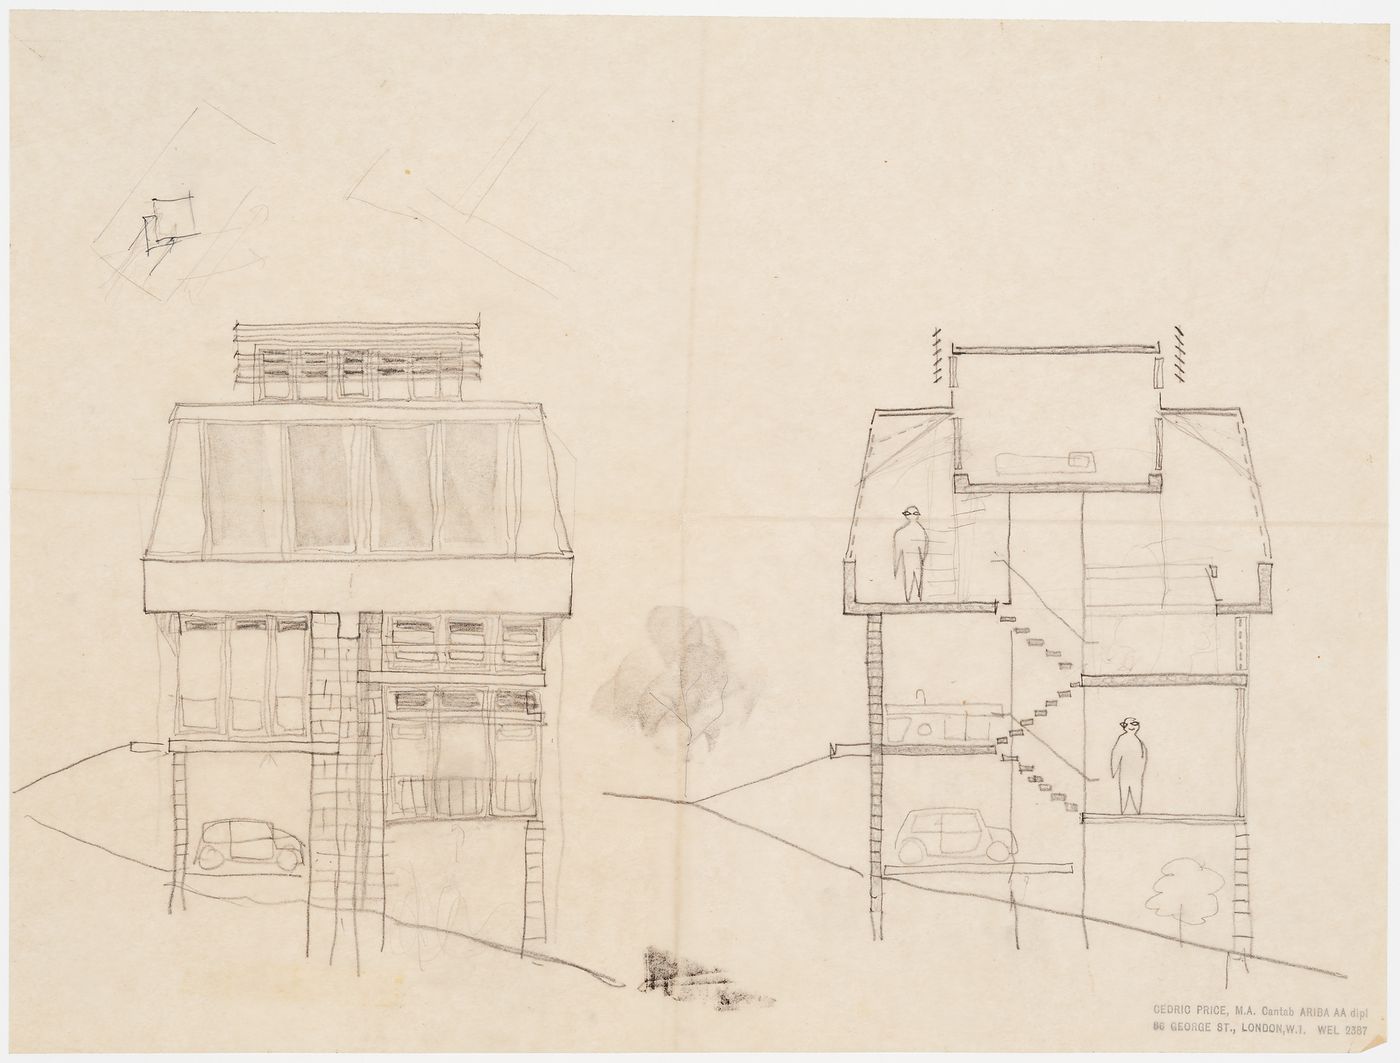 Elevation and section for a house in Selsdon, Croydon, Greater London, England